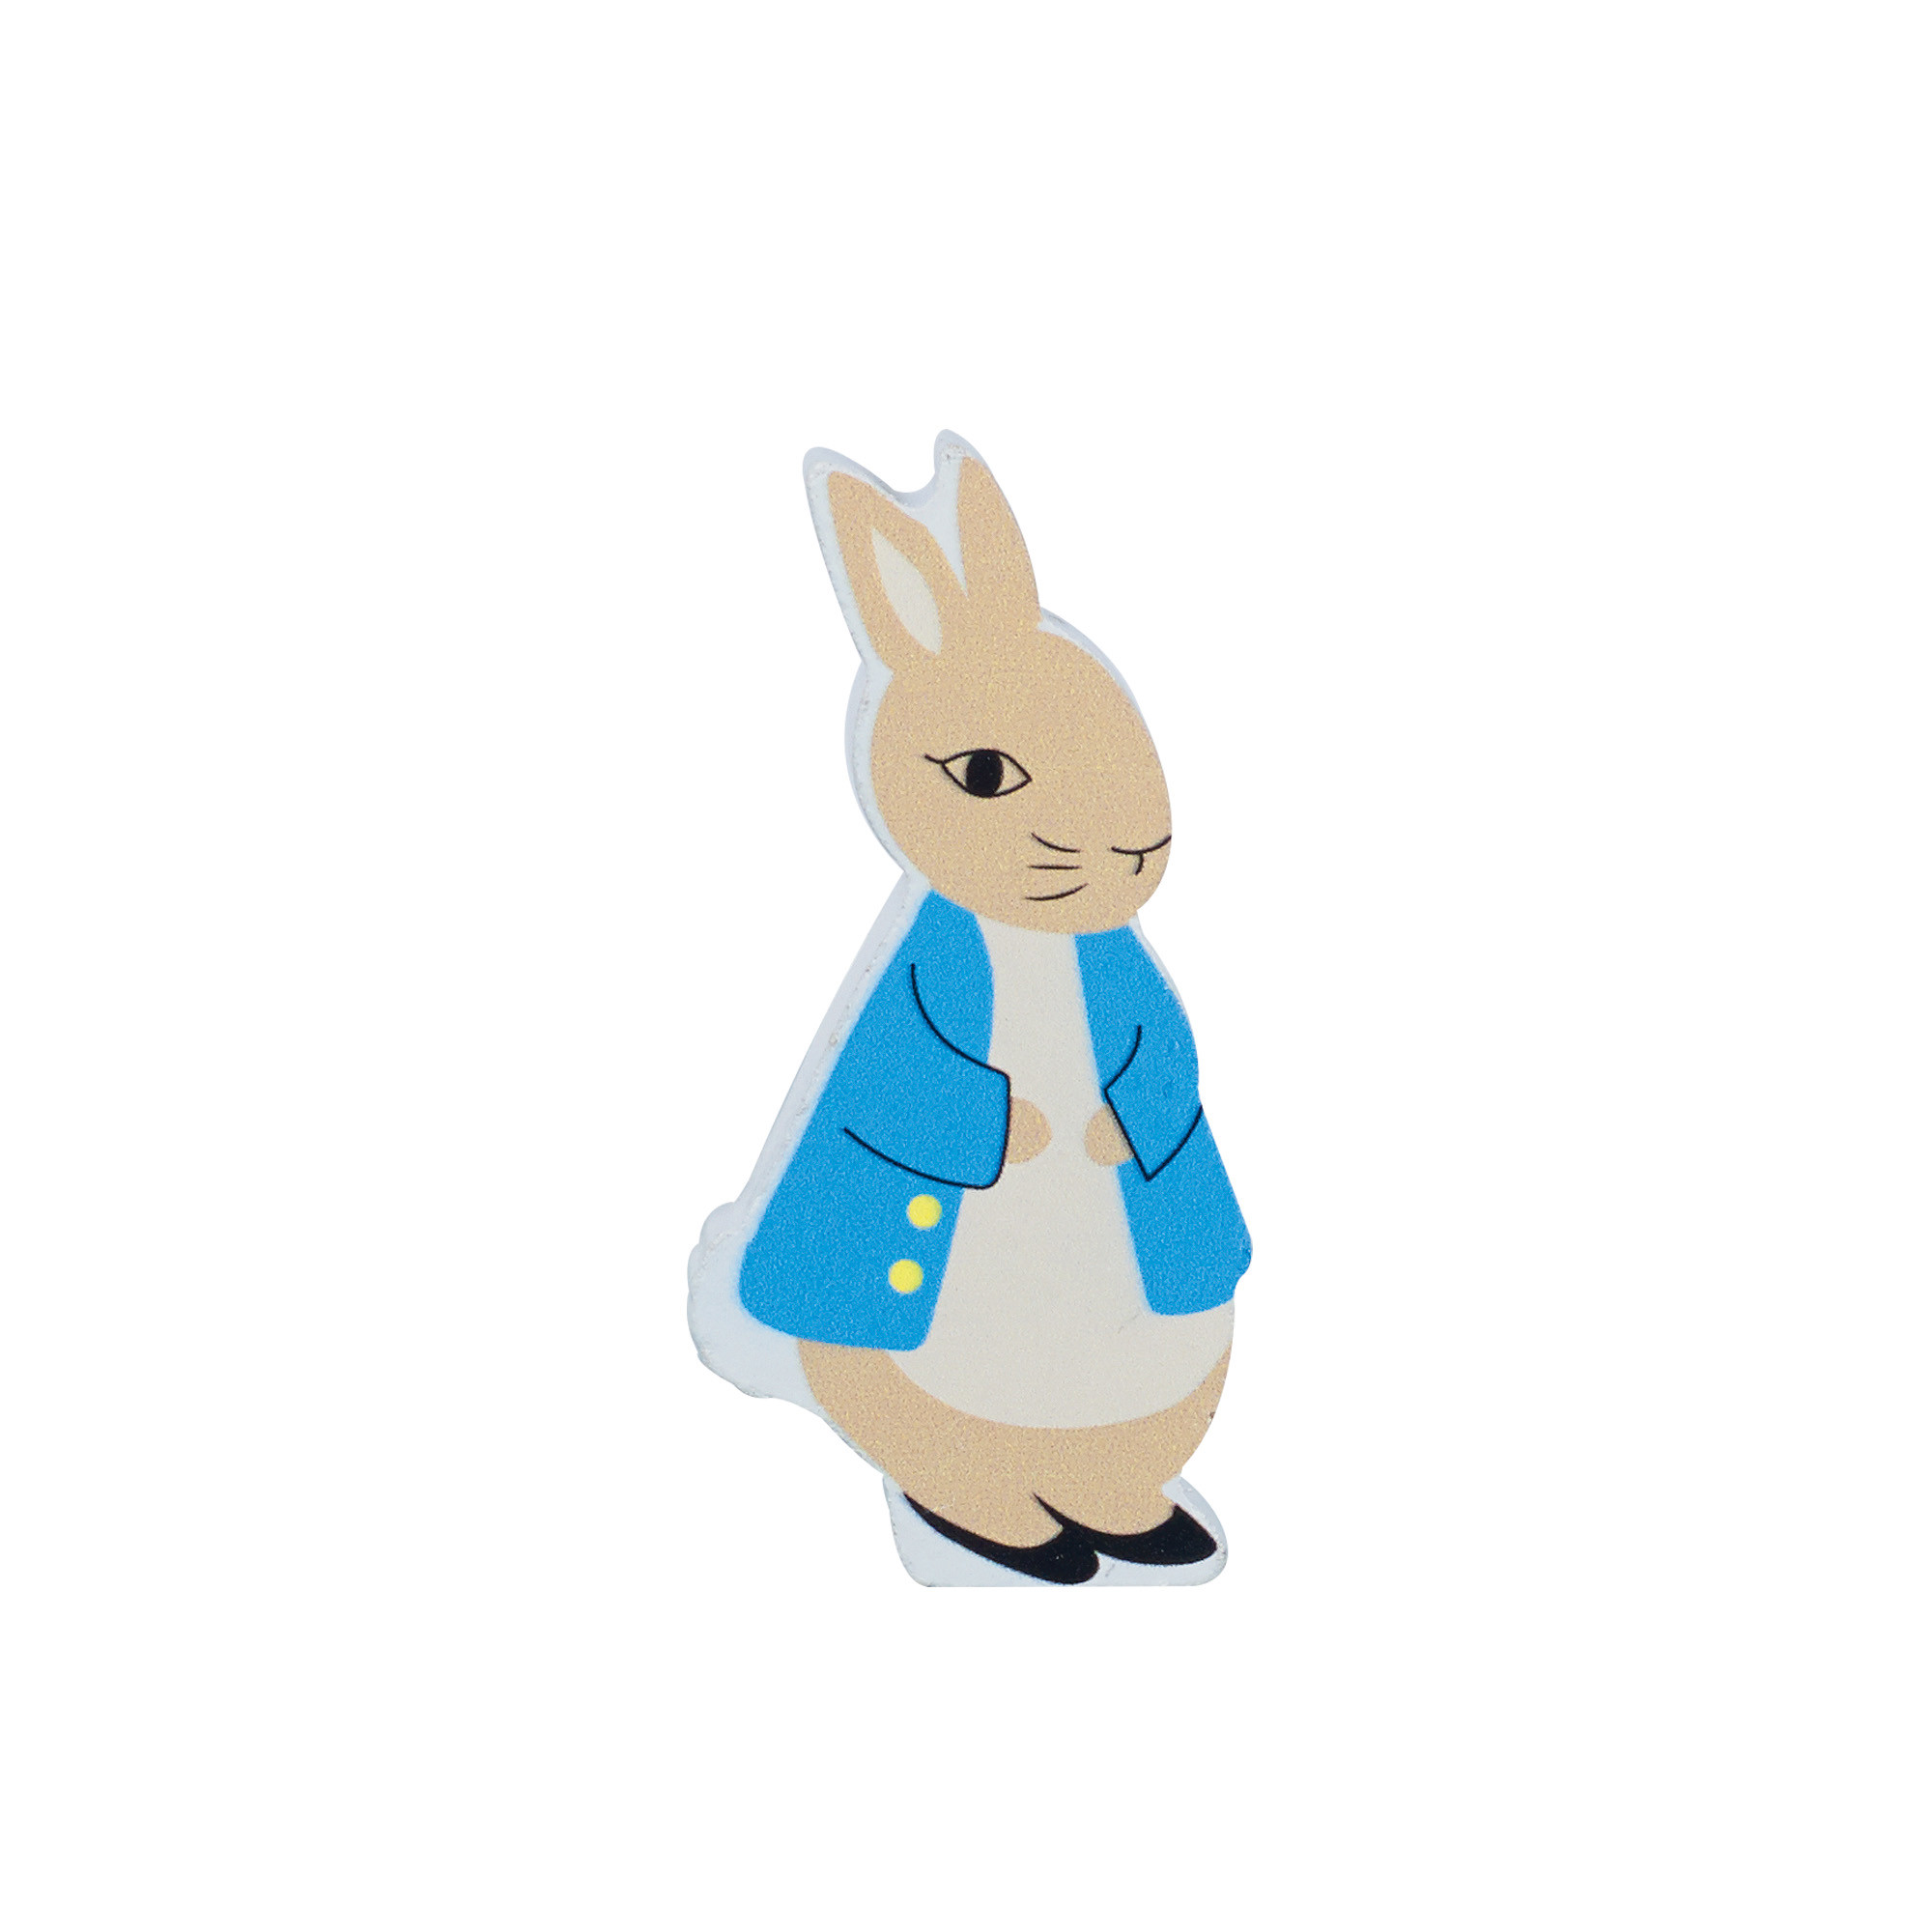 https://shop.barnardos.org.uk/artwork/product_images/WOODEN%20CHARACTER%20-%20PETER%20RABBIT.jpg?quality=90&scale=canvas